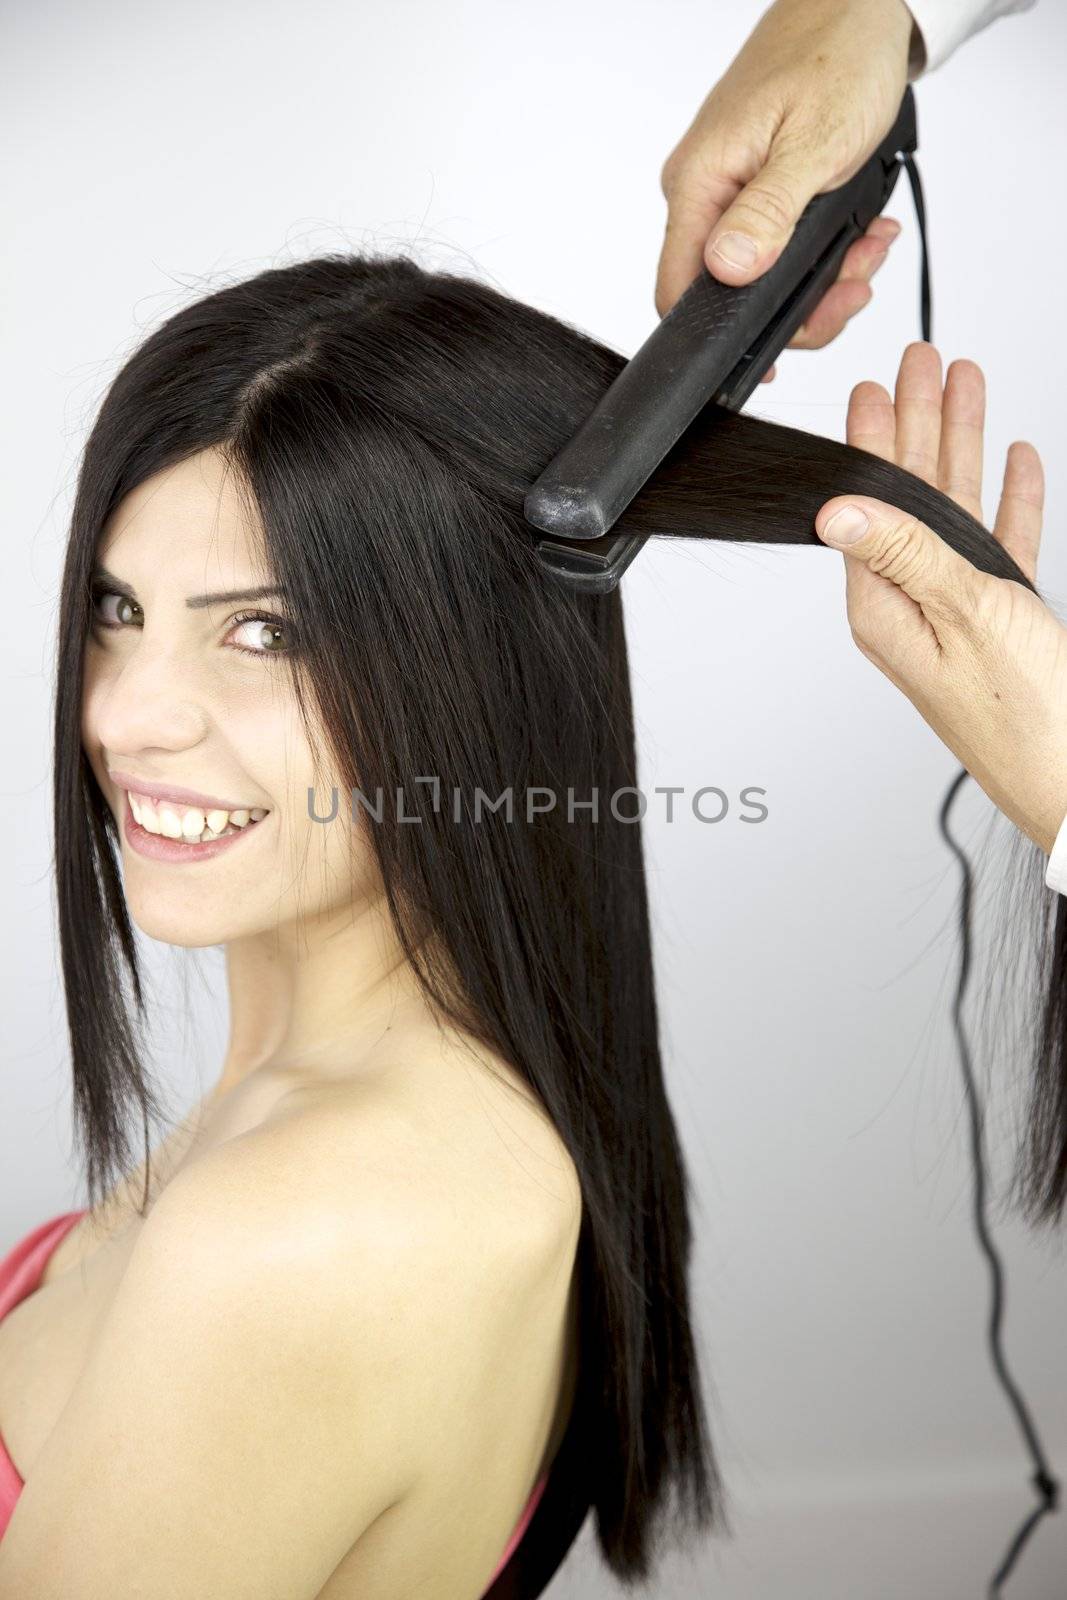 Female model getting long hair ironed by fmarsicano